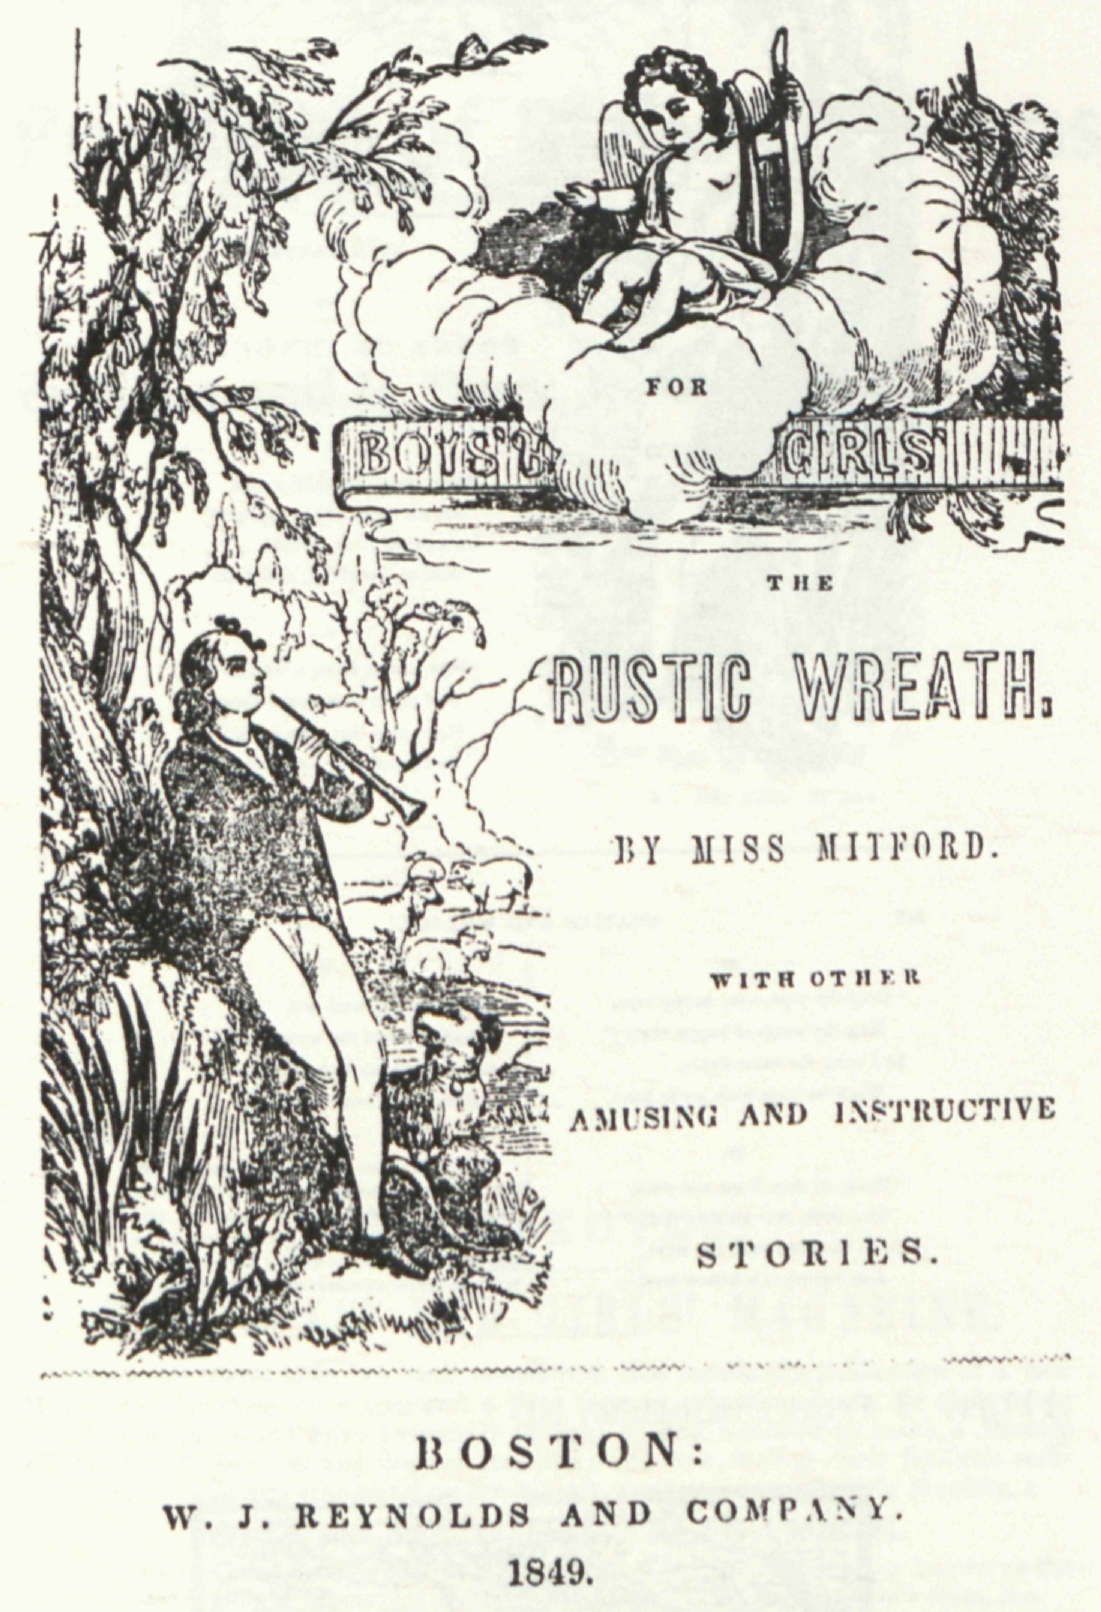 FOR
                    	BOYS’ & GIRLS’
                    	
                    	THE
                    	RUSTIC WREATH.
                    	
                    	BY MISS MITFORD.
                    	
                    	WITH OTHER
                    	AMUSTING AND INSTRUCTIVE
                    	STORIES.
                    	
                    	BOSTON:
                    	W. J. REYNOLDS AND COMPANY.
                    	1849.